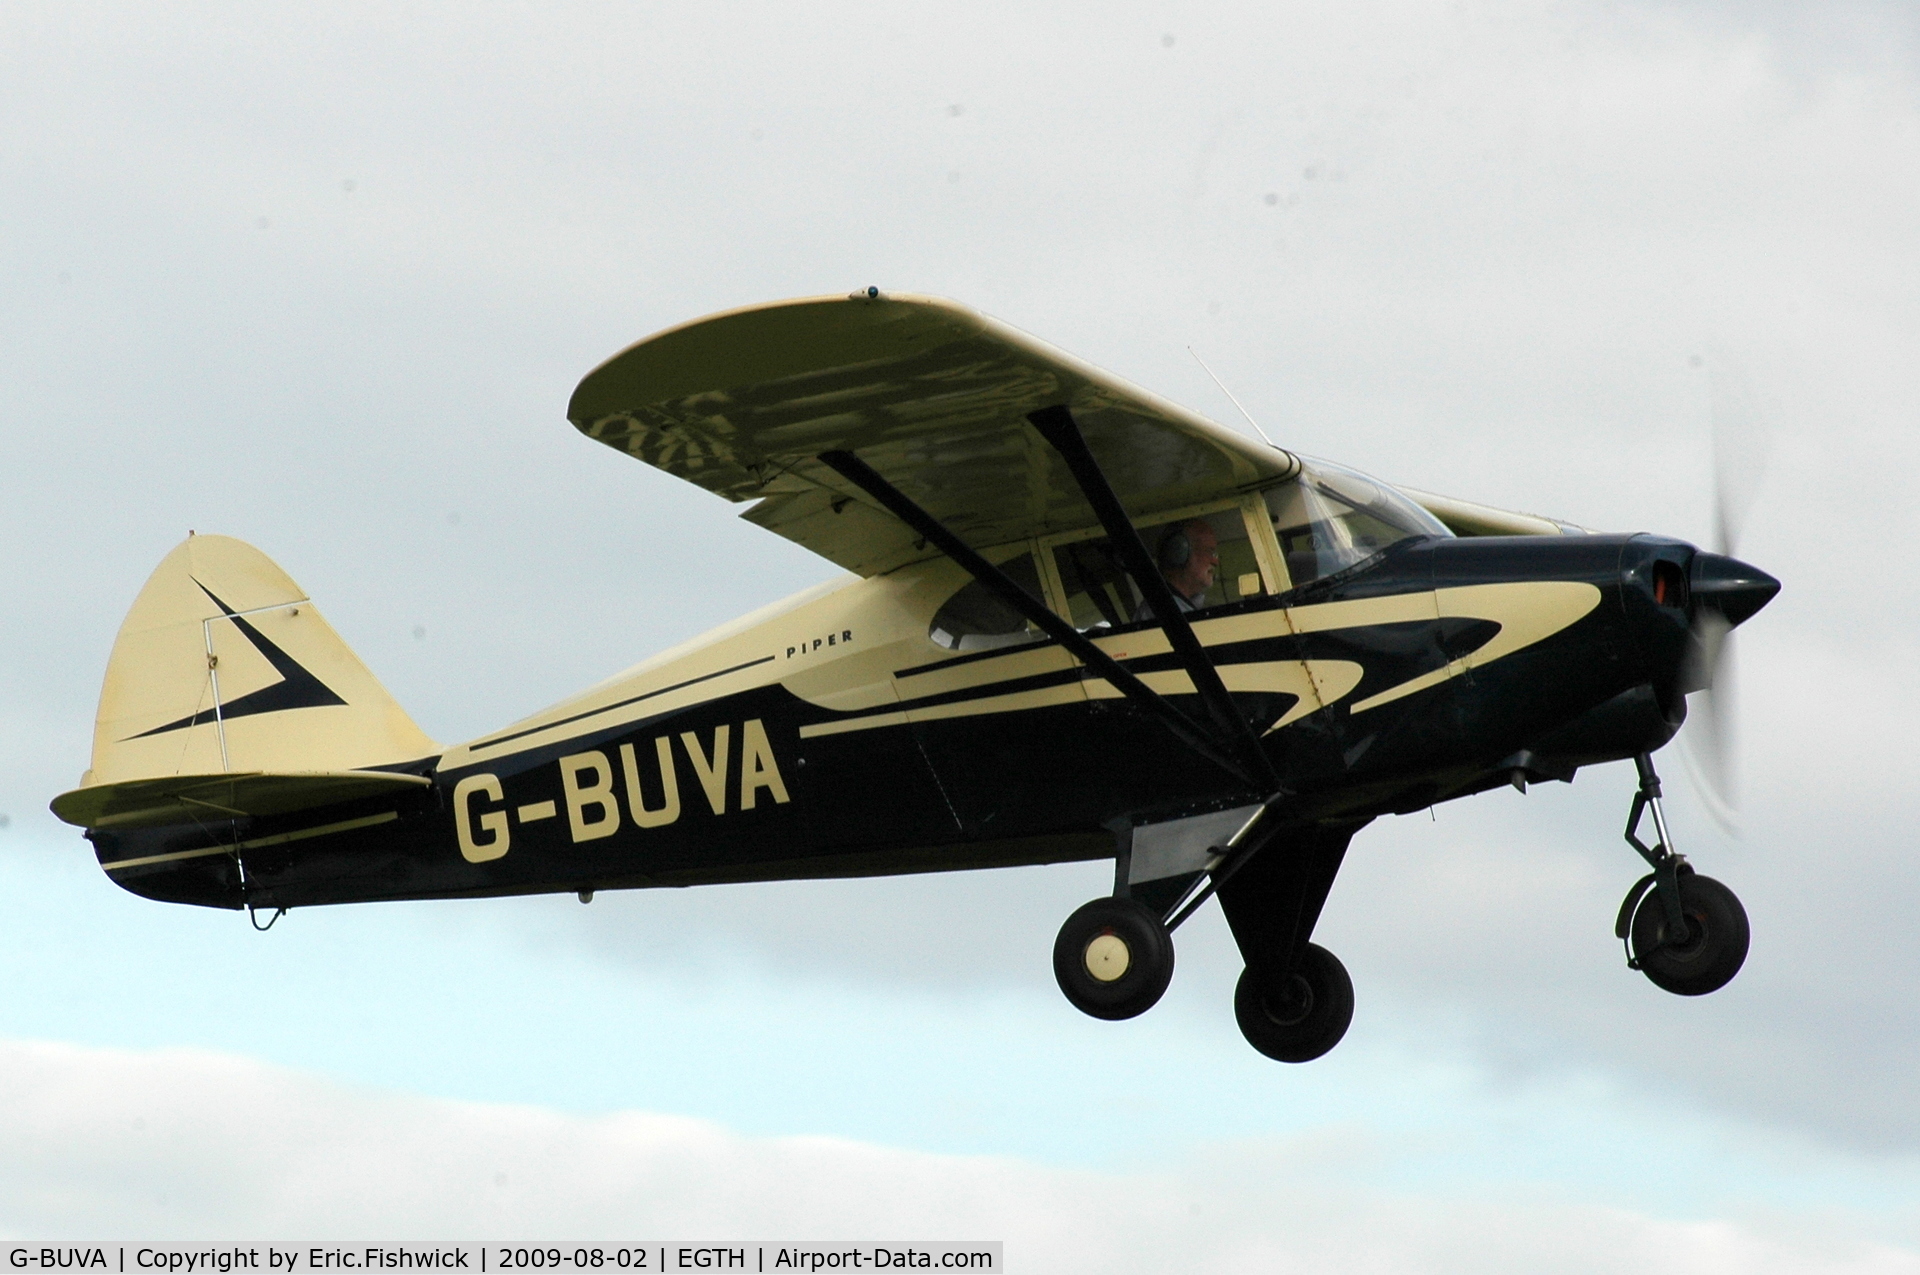 G-BUVA, 1959 Piper PA-22-135 Tri-Pacer C/N 22-1301, G-BUVA departing Shuttleworth Military Pagent Air Display Aug 09